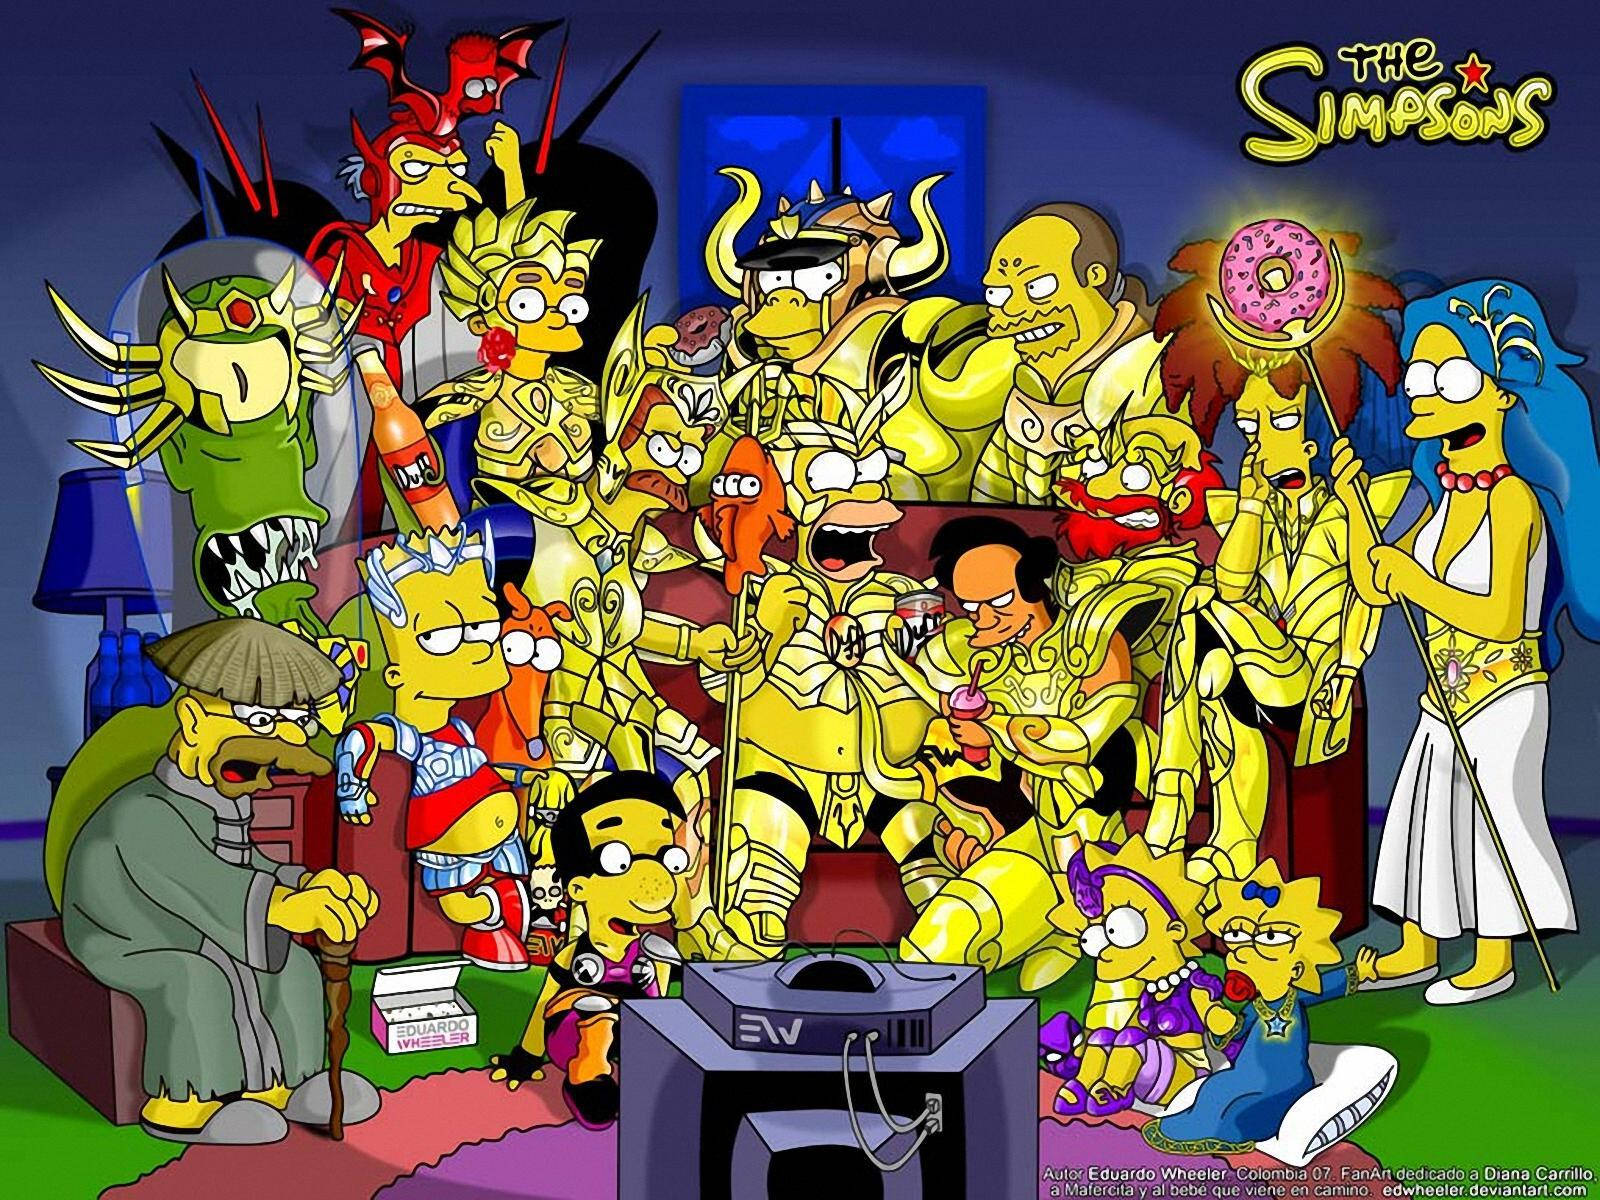 The Simpsons Halloween Specials Background